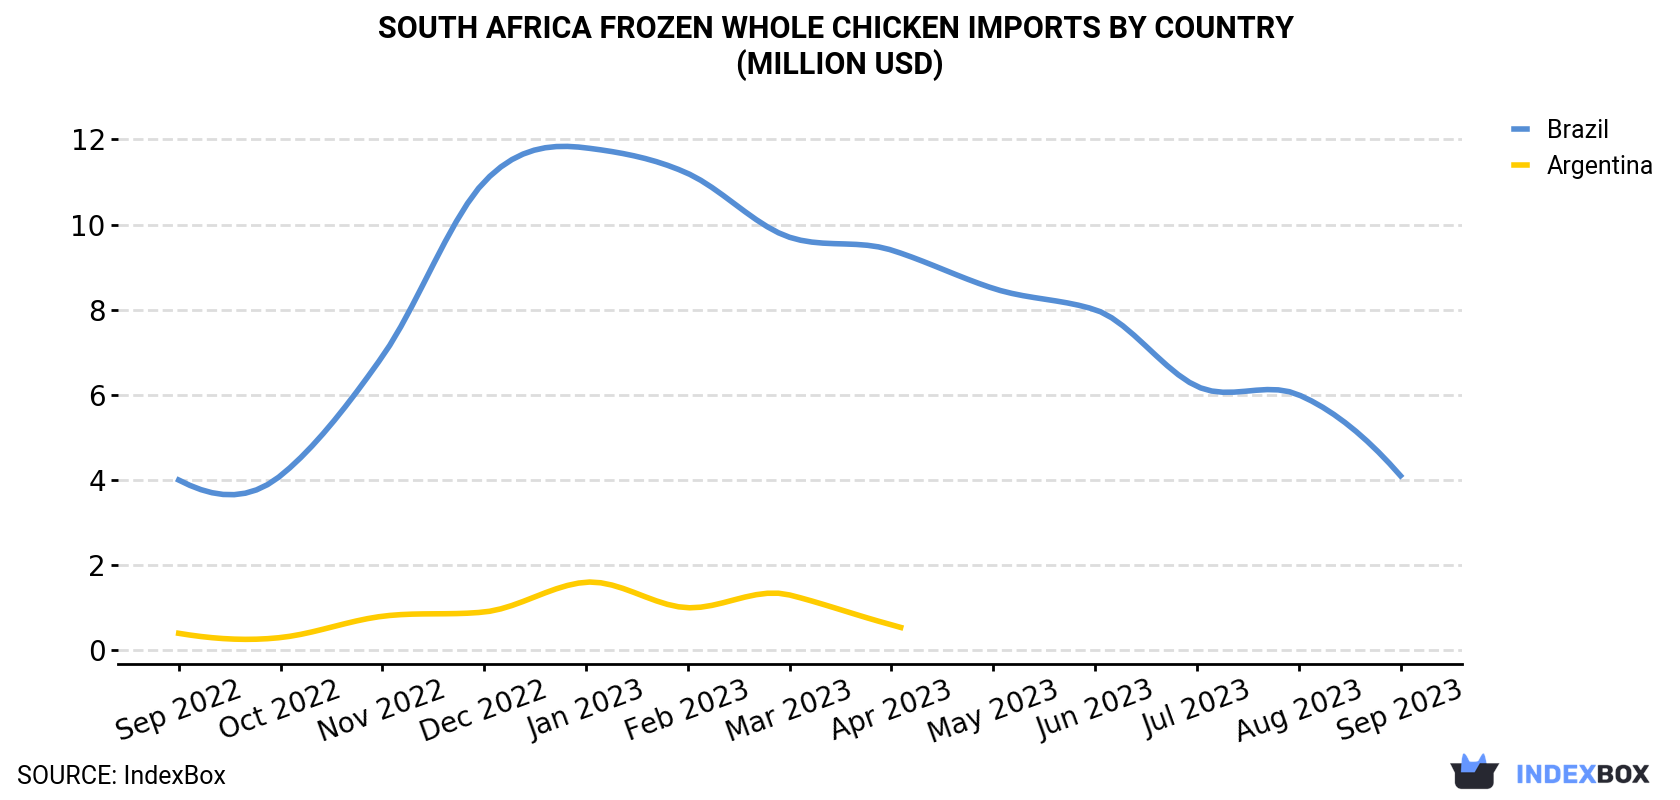 South Africa Frozen Whole Chicken Imports By Country (Million USD)